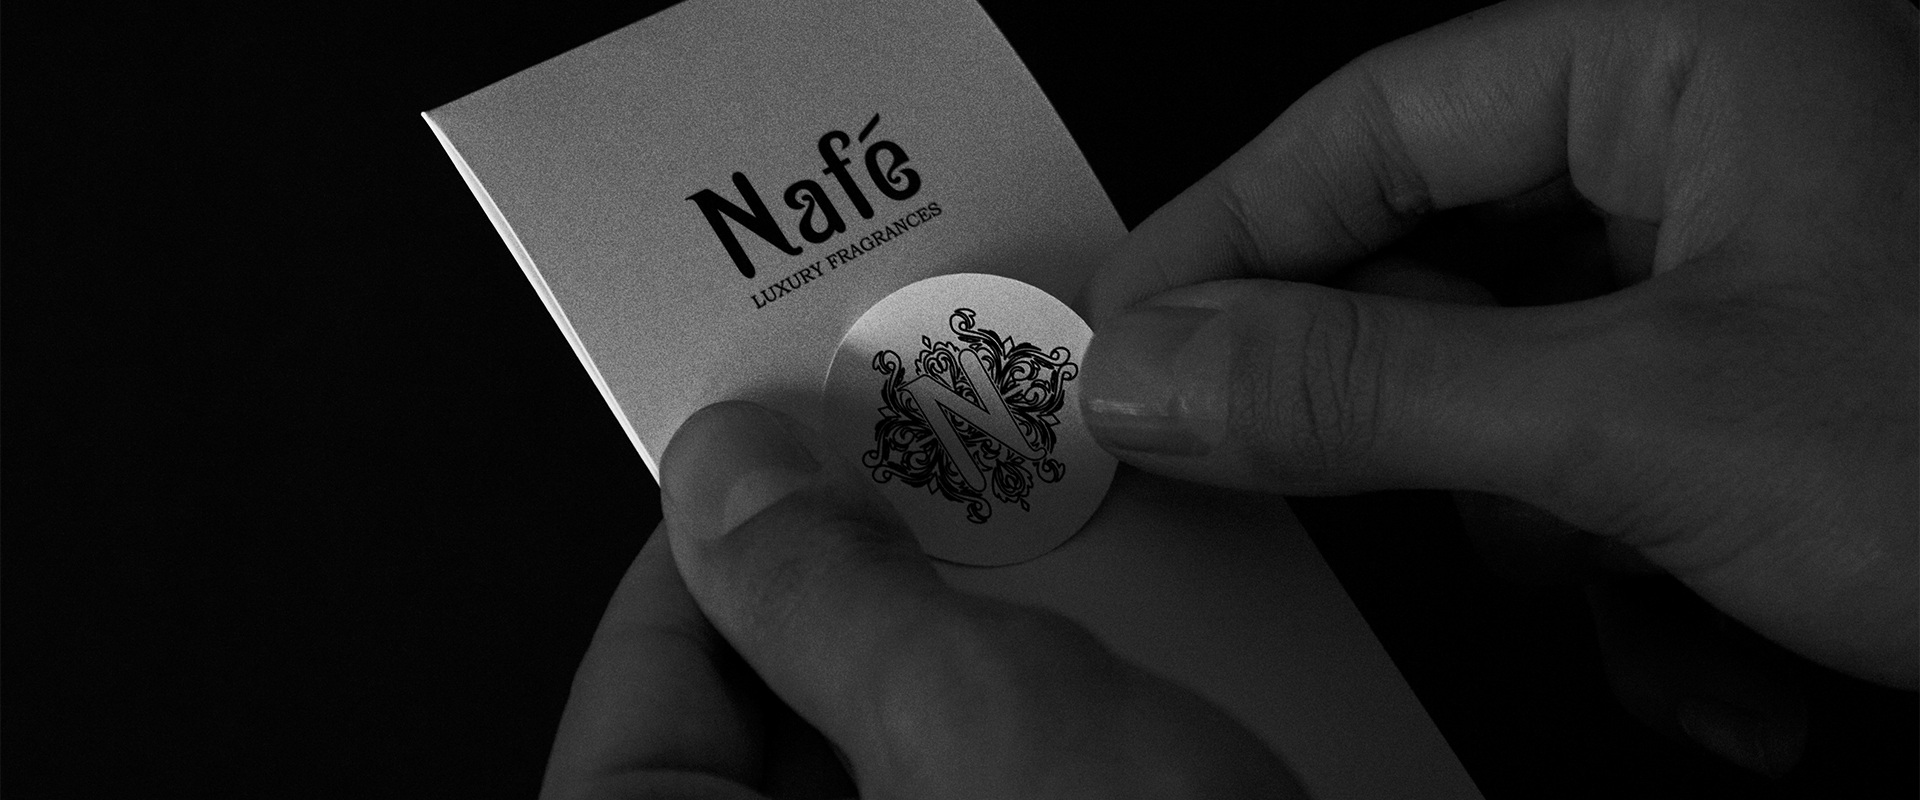 About Nafe